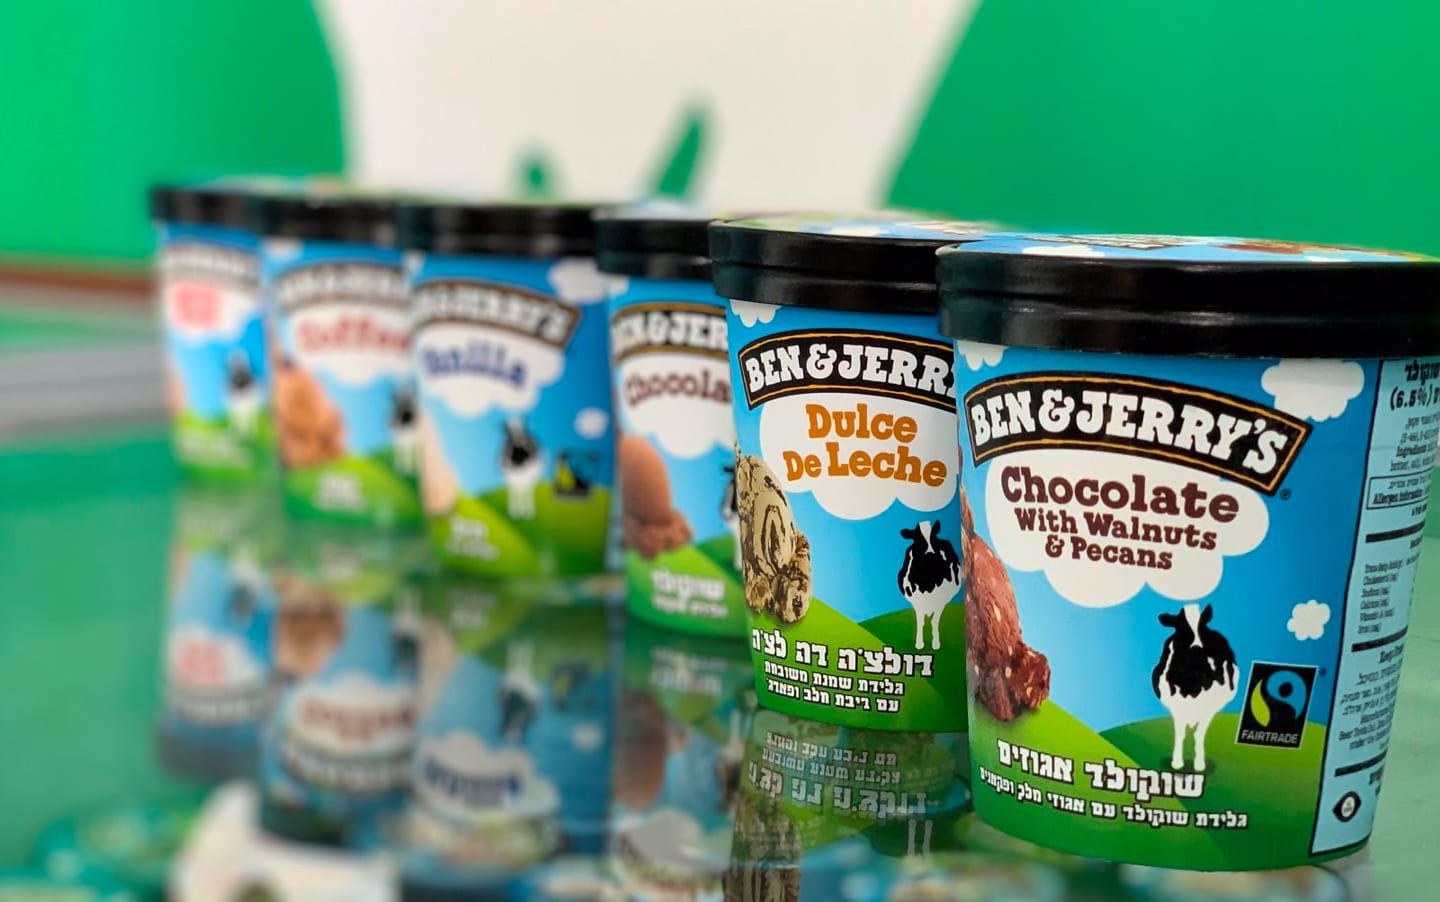 Reaction to Ben & Jerry’s decision ranged from praise to criticism.